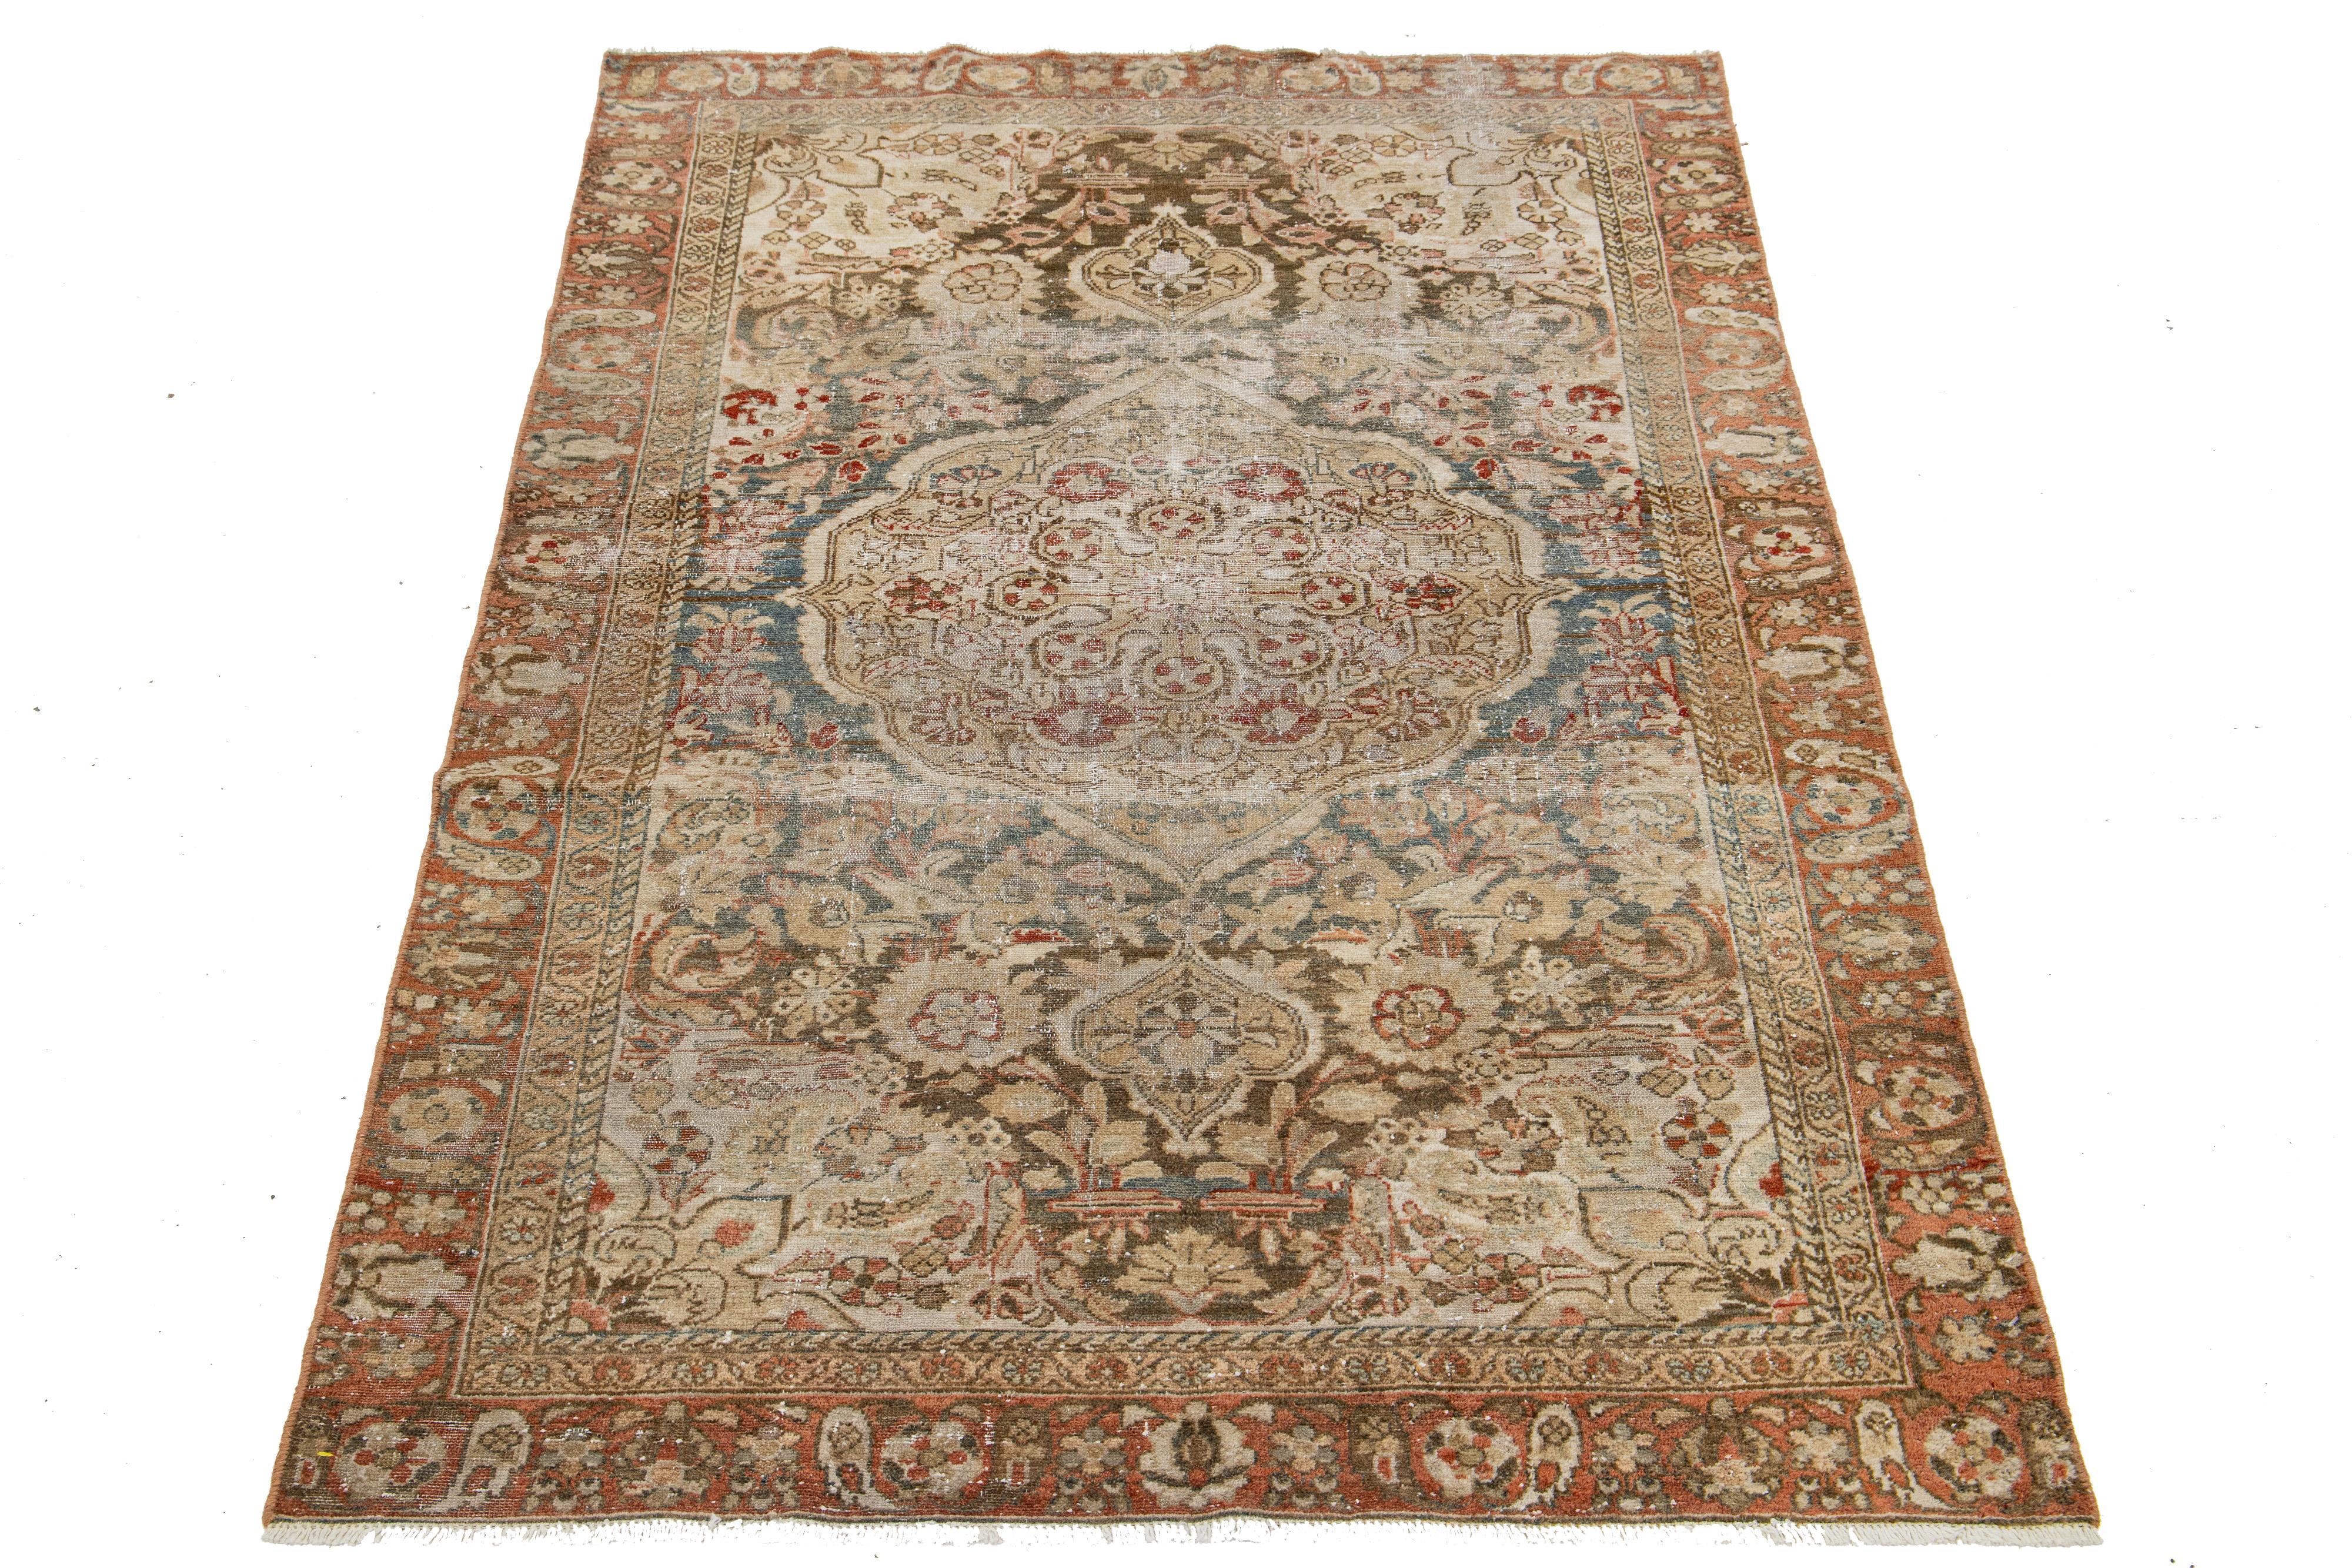 Beautiful Antique Tabriz hand-knotted wool rug with a brown color field. This Persian rug has blue, rust, and brown accents in a gorgeous medallion floral design. 

This rug measures 4'2